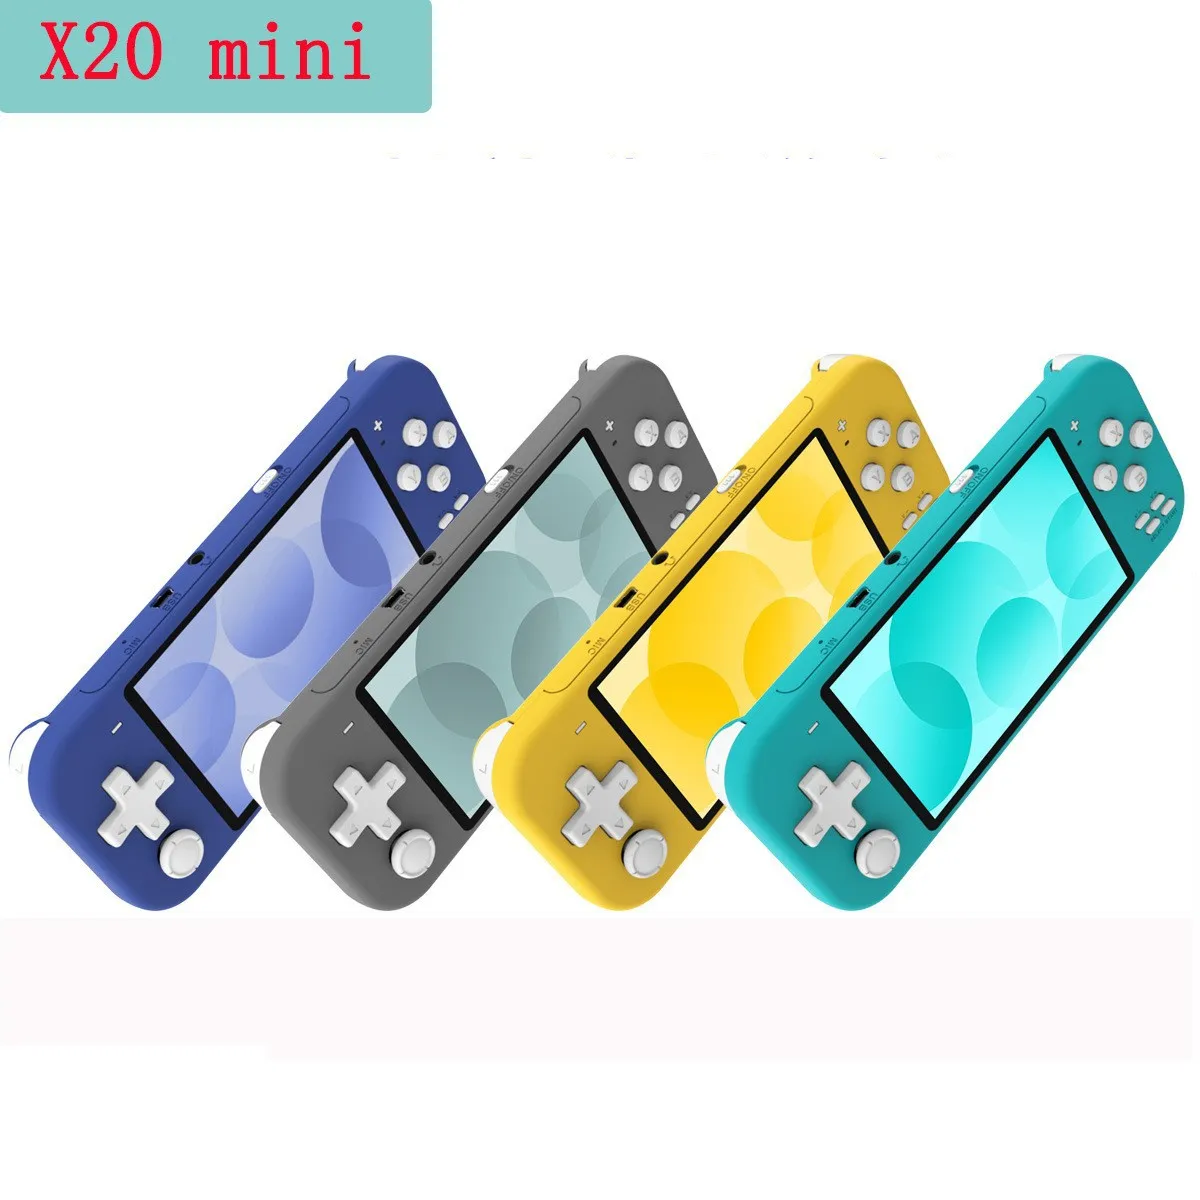 X20 Mini Handheld Retro Games Console Protable Game Players 8GB 4.3-inch Screen Supports FC/SFC/GBA/NES/GB/MD Nostalgic GBA for Kids Gift